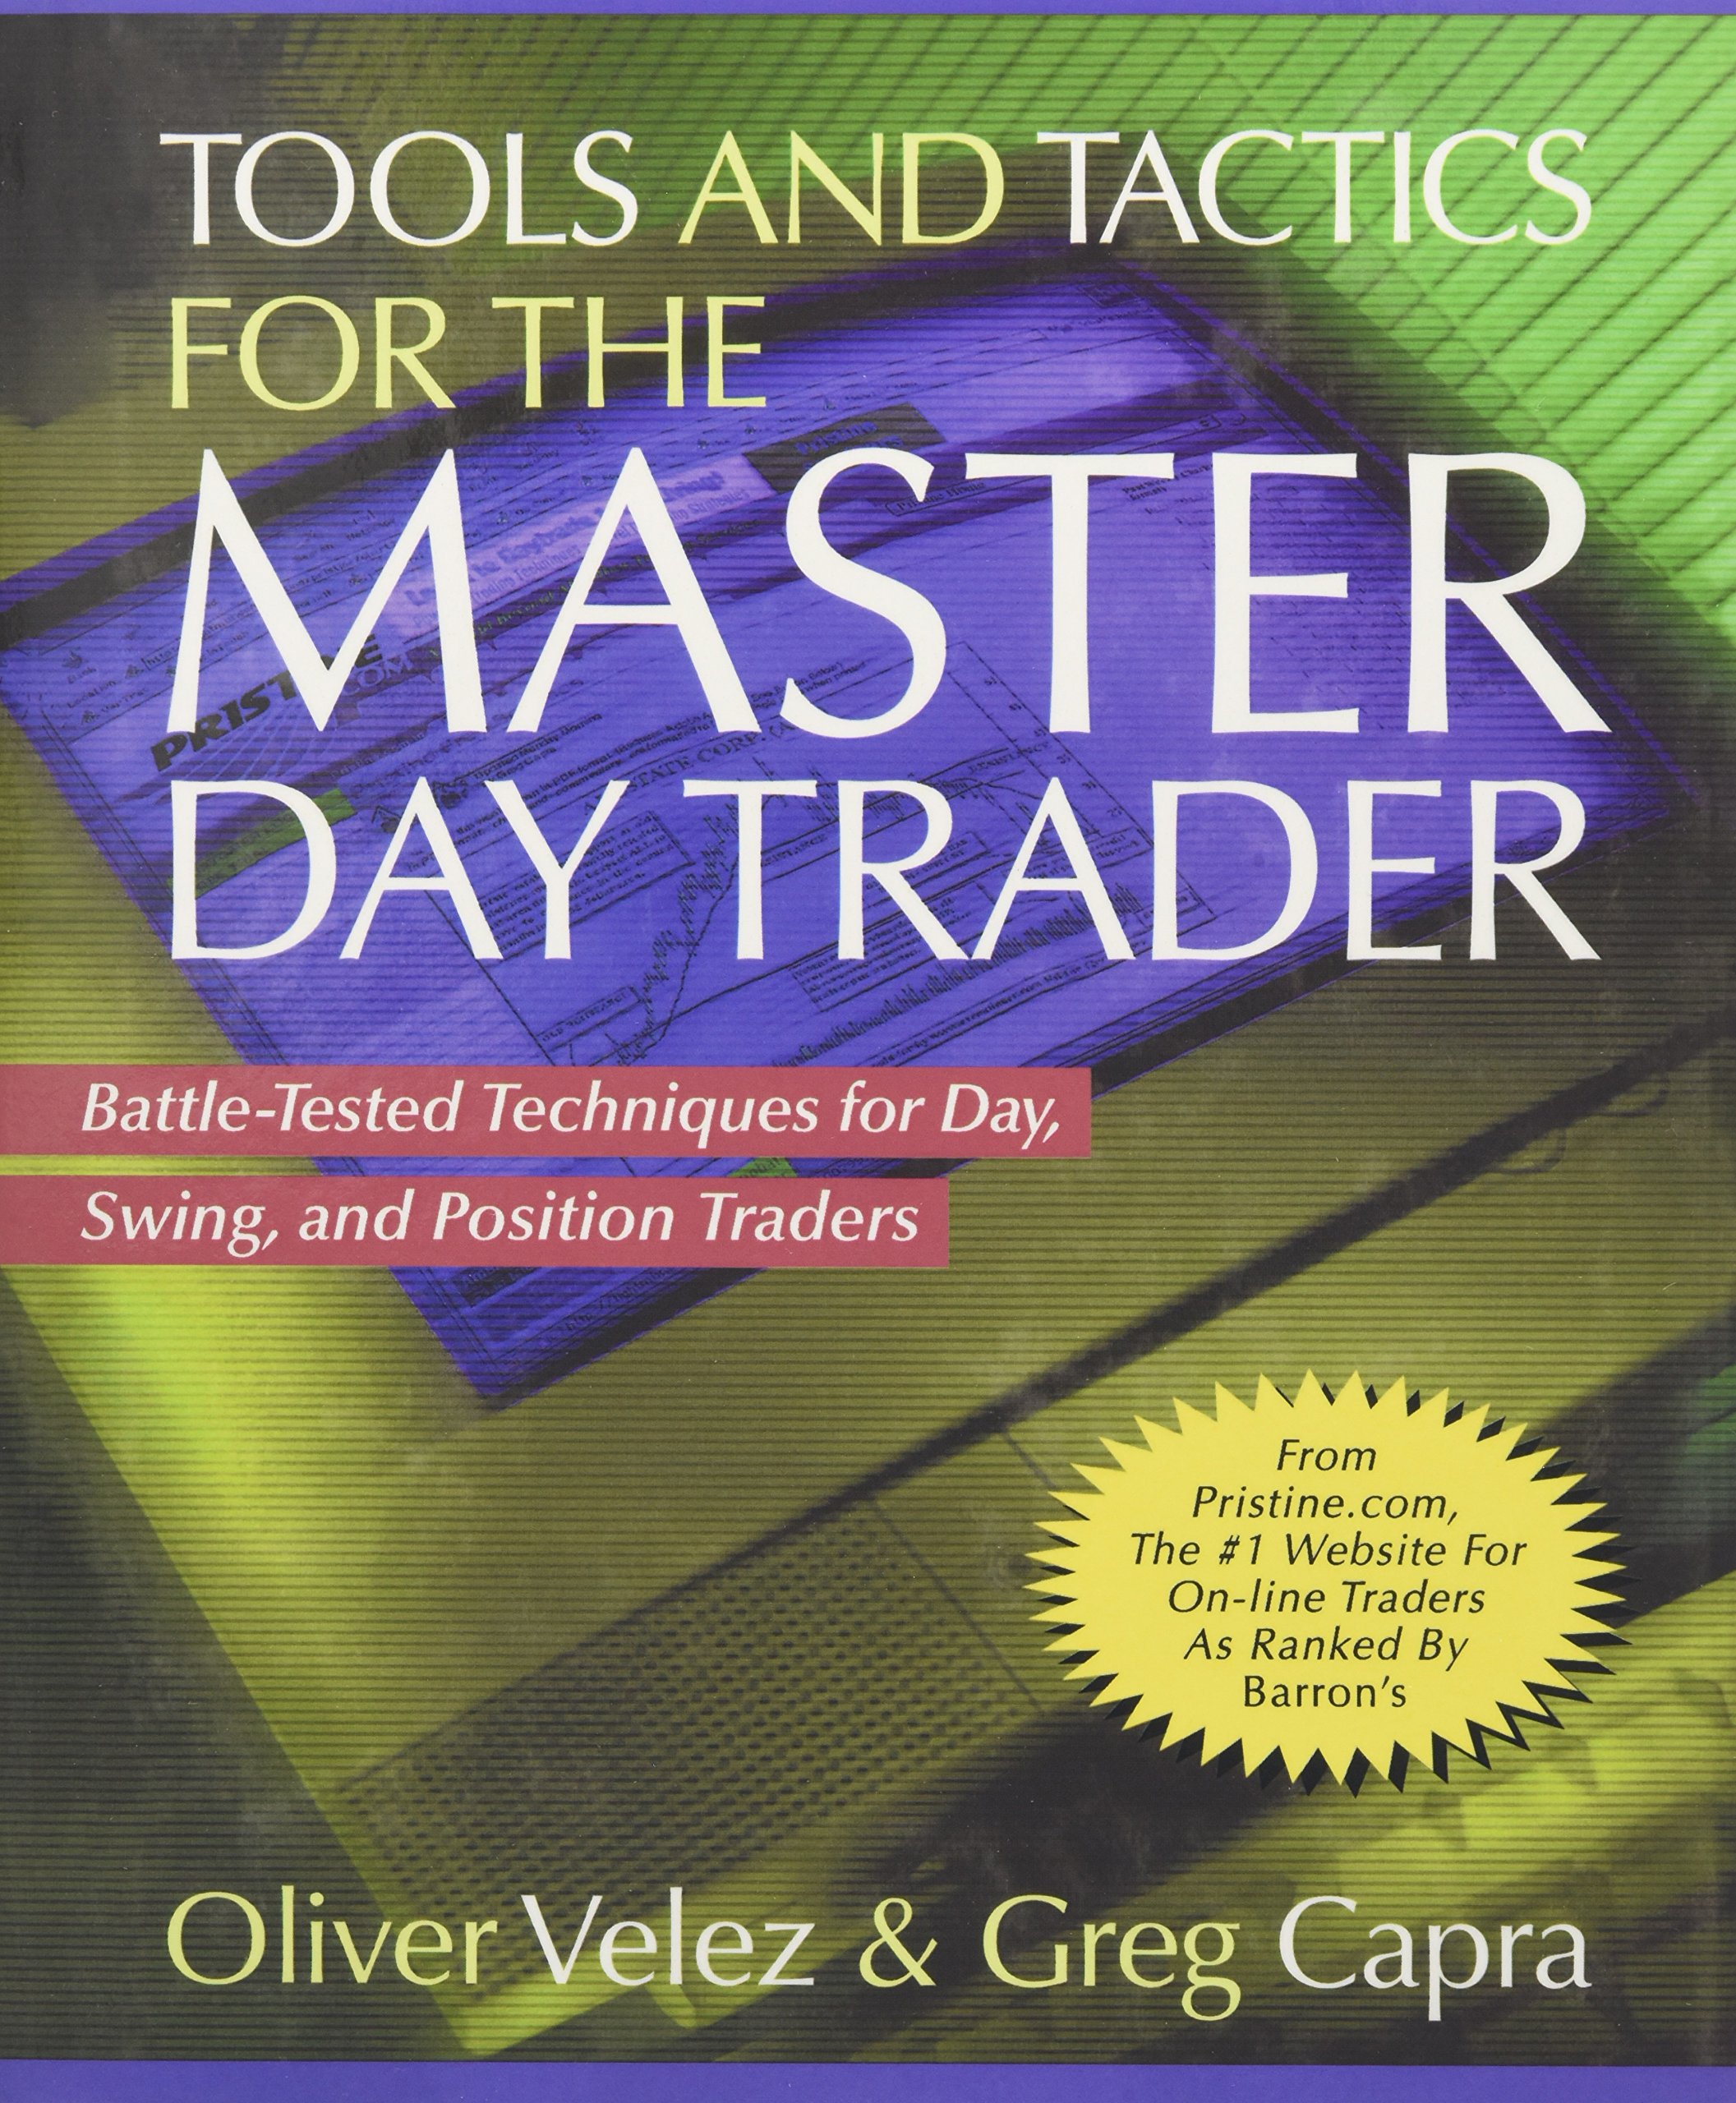 [Oliver Velez, Greg Capra] Tools and Tactics for the Master Day Trader